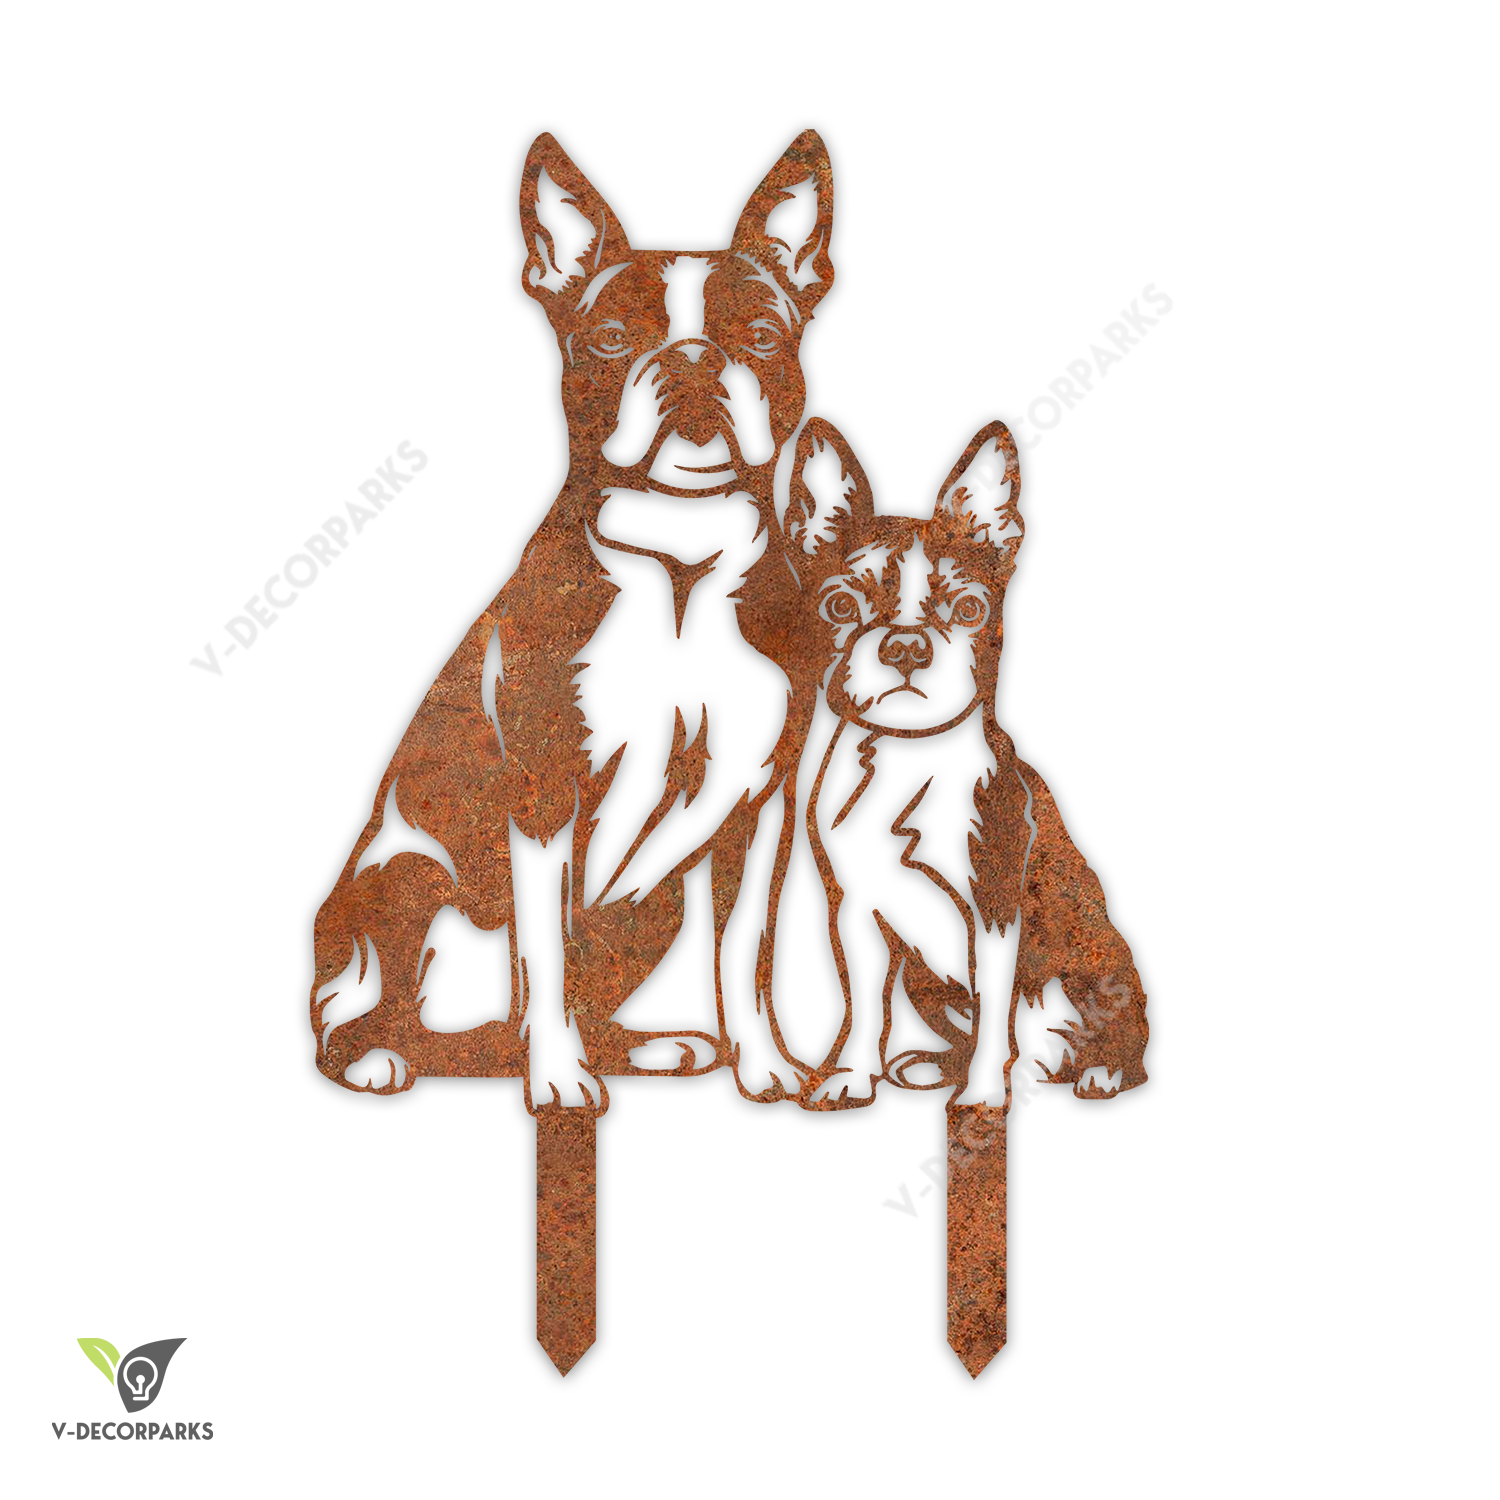 Rusted Boston Terrier Dog Mother With Boston Terrier Baby Metal Garden Art, Boston Terrier Outer Stake